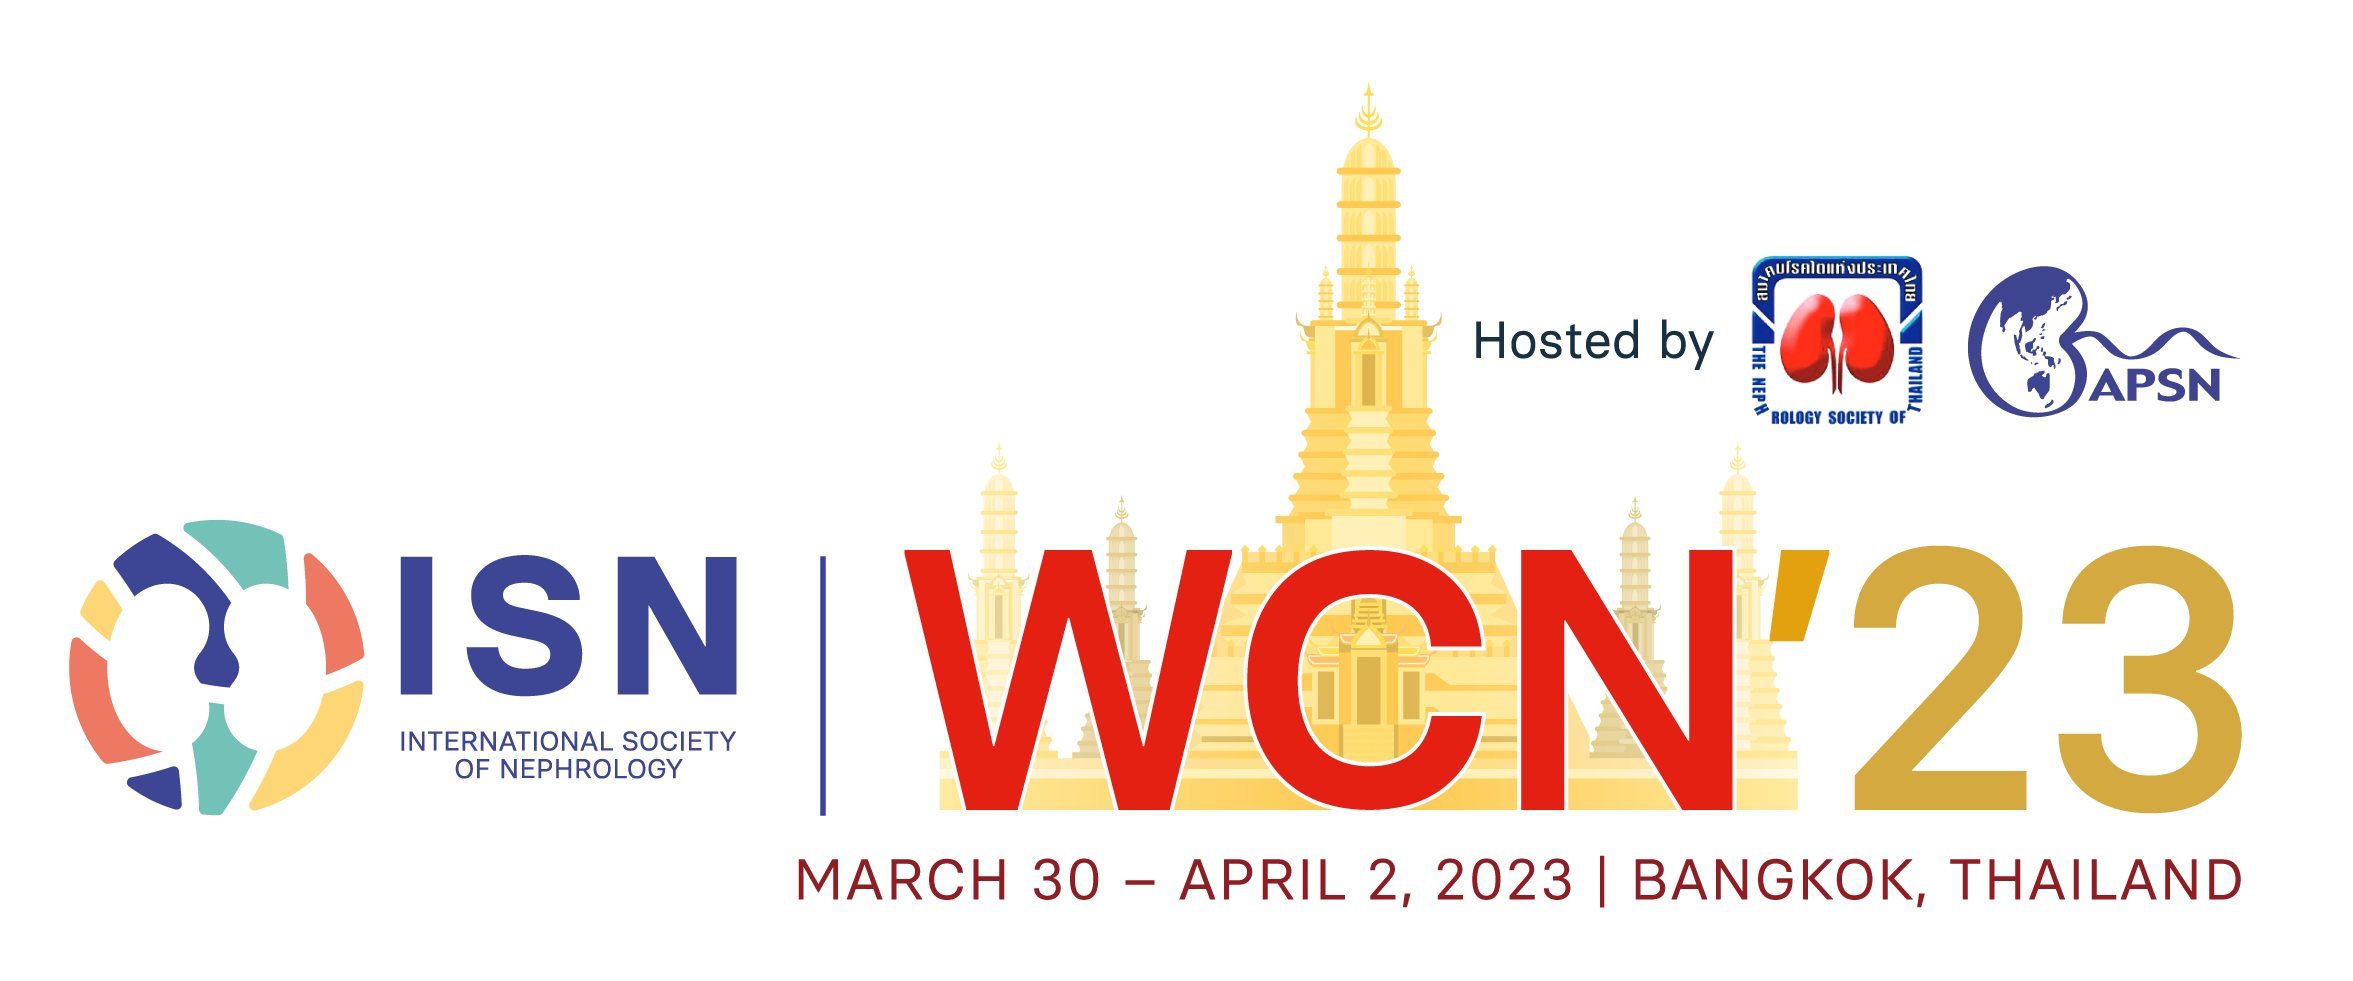 Join the ISN Wold Congress of Nephrology, Marc 30-April 2, 2023 in Bangkok, Thailand